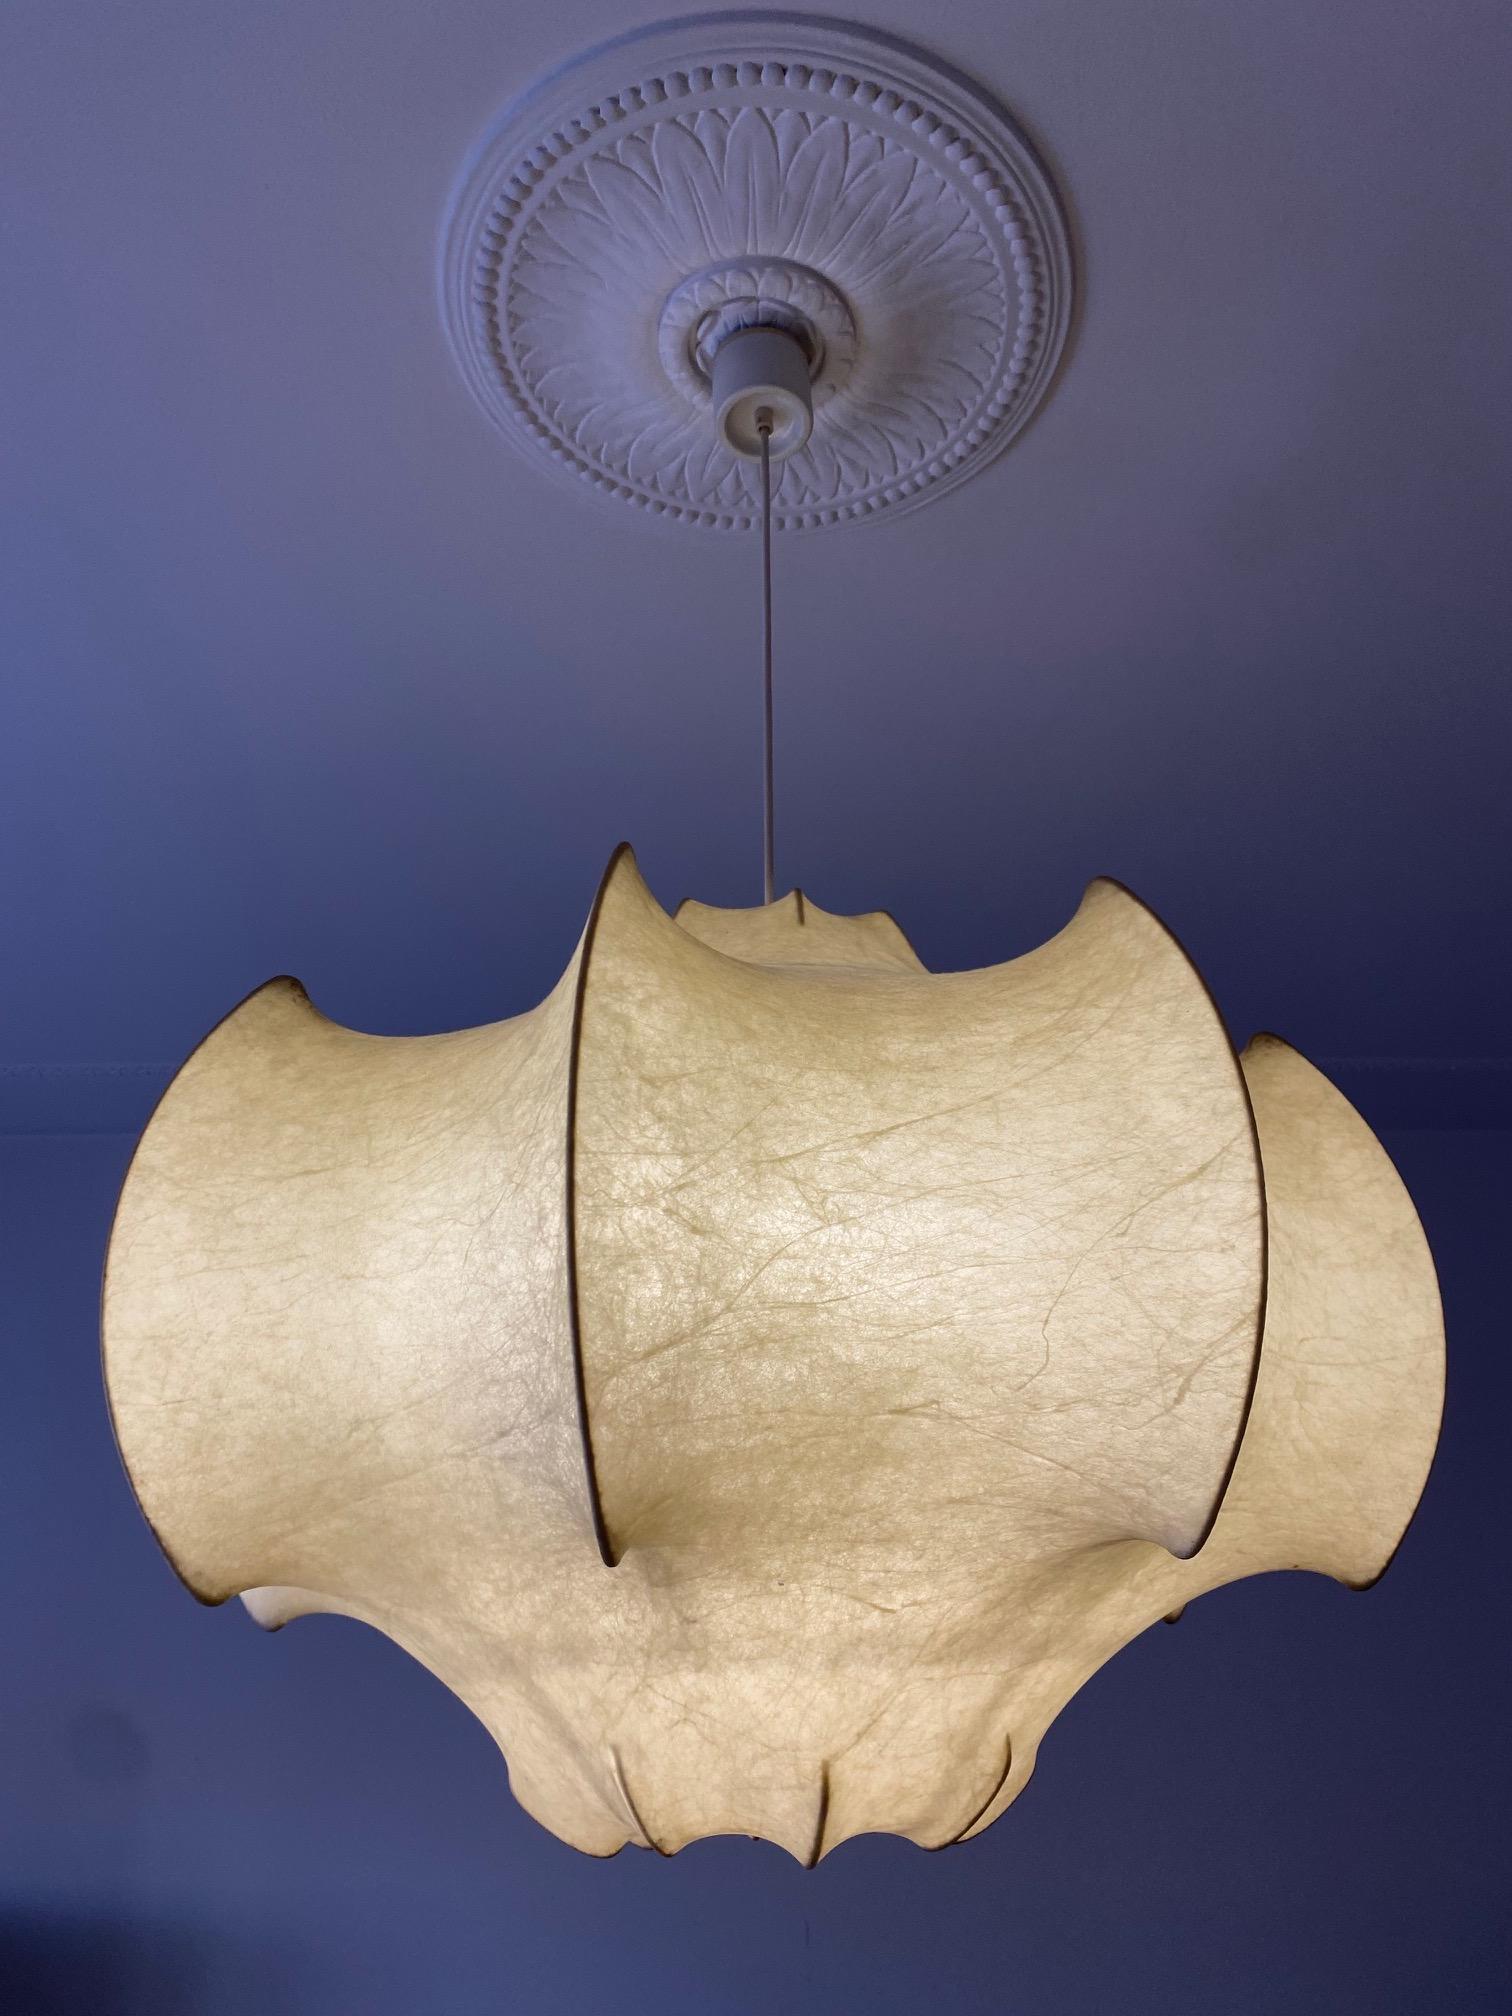 First edition Viscontea suspension light by Achille & Pier Castiglioni for Flos. Designed and manufactured in Italy, circa 1960's.

This chandelier, made in the 1960s, is one of the icons of Italian design, combining modern forms with an organic,